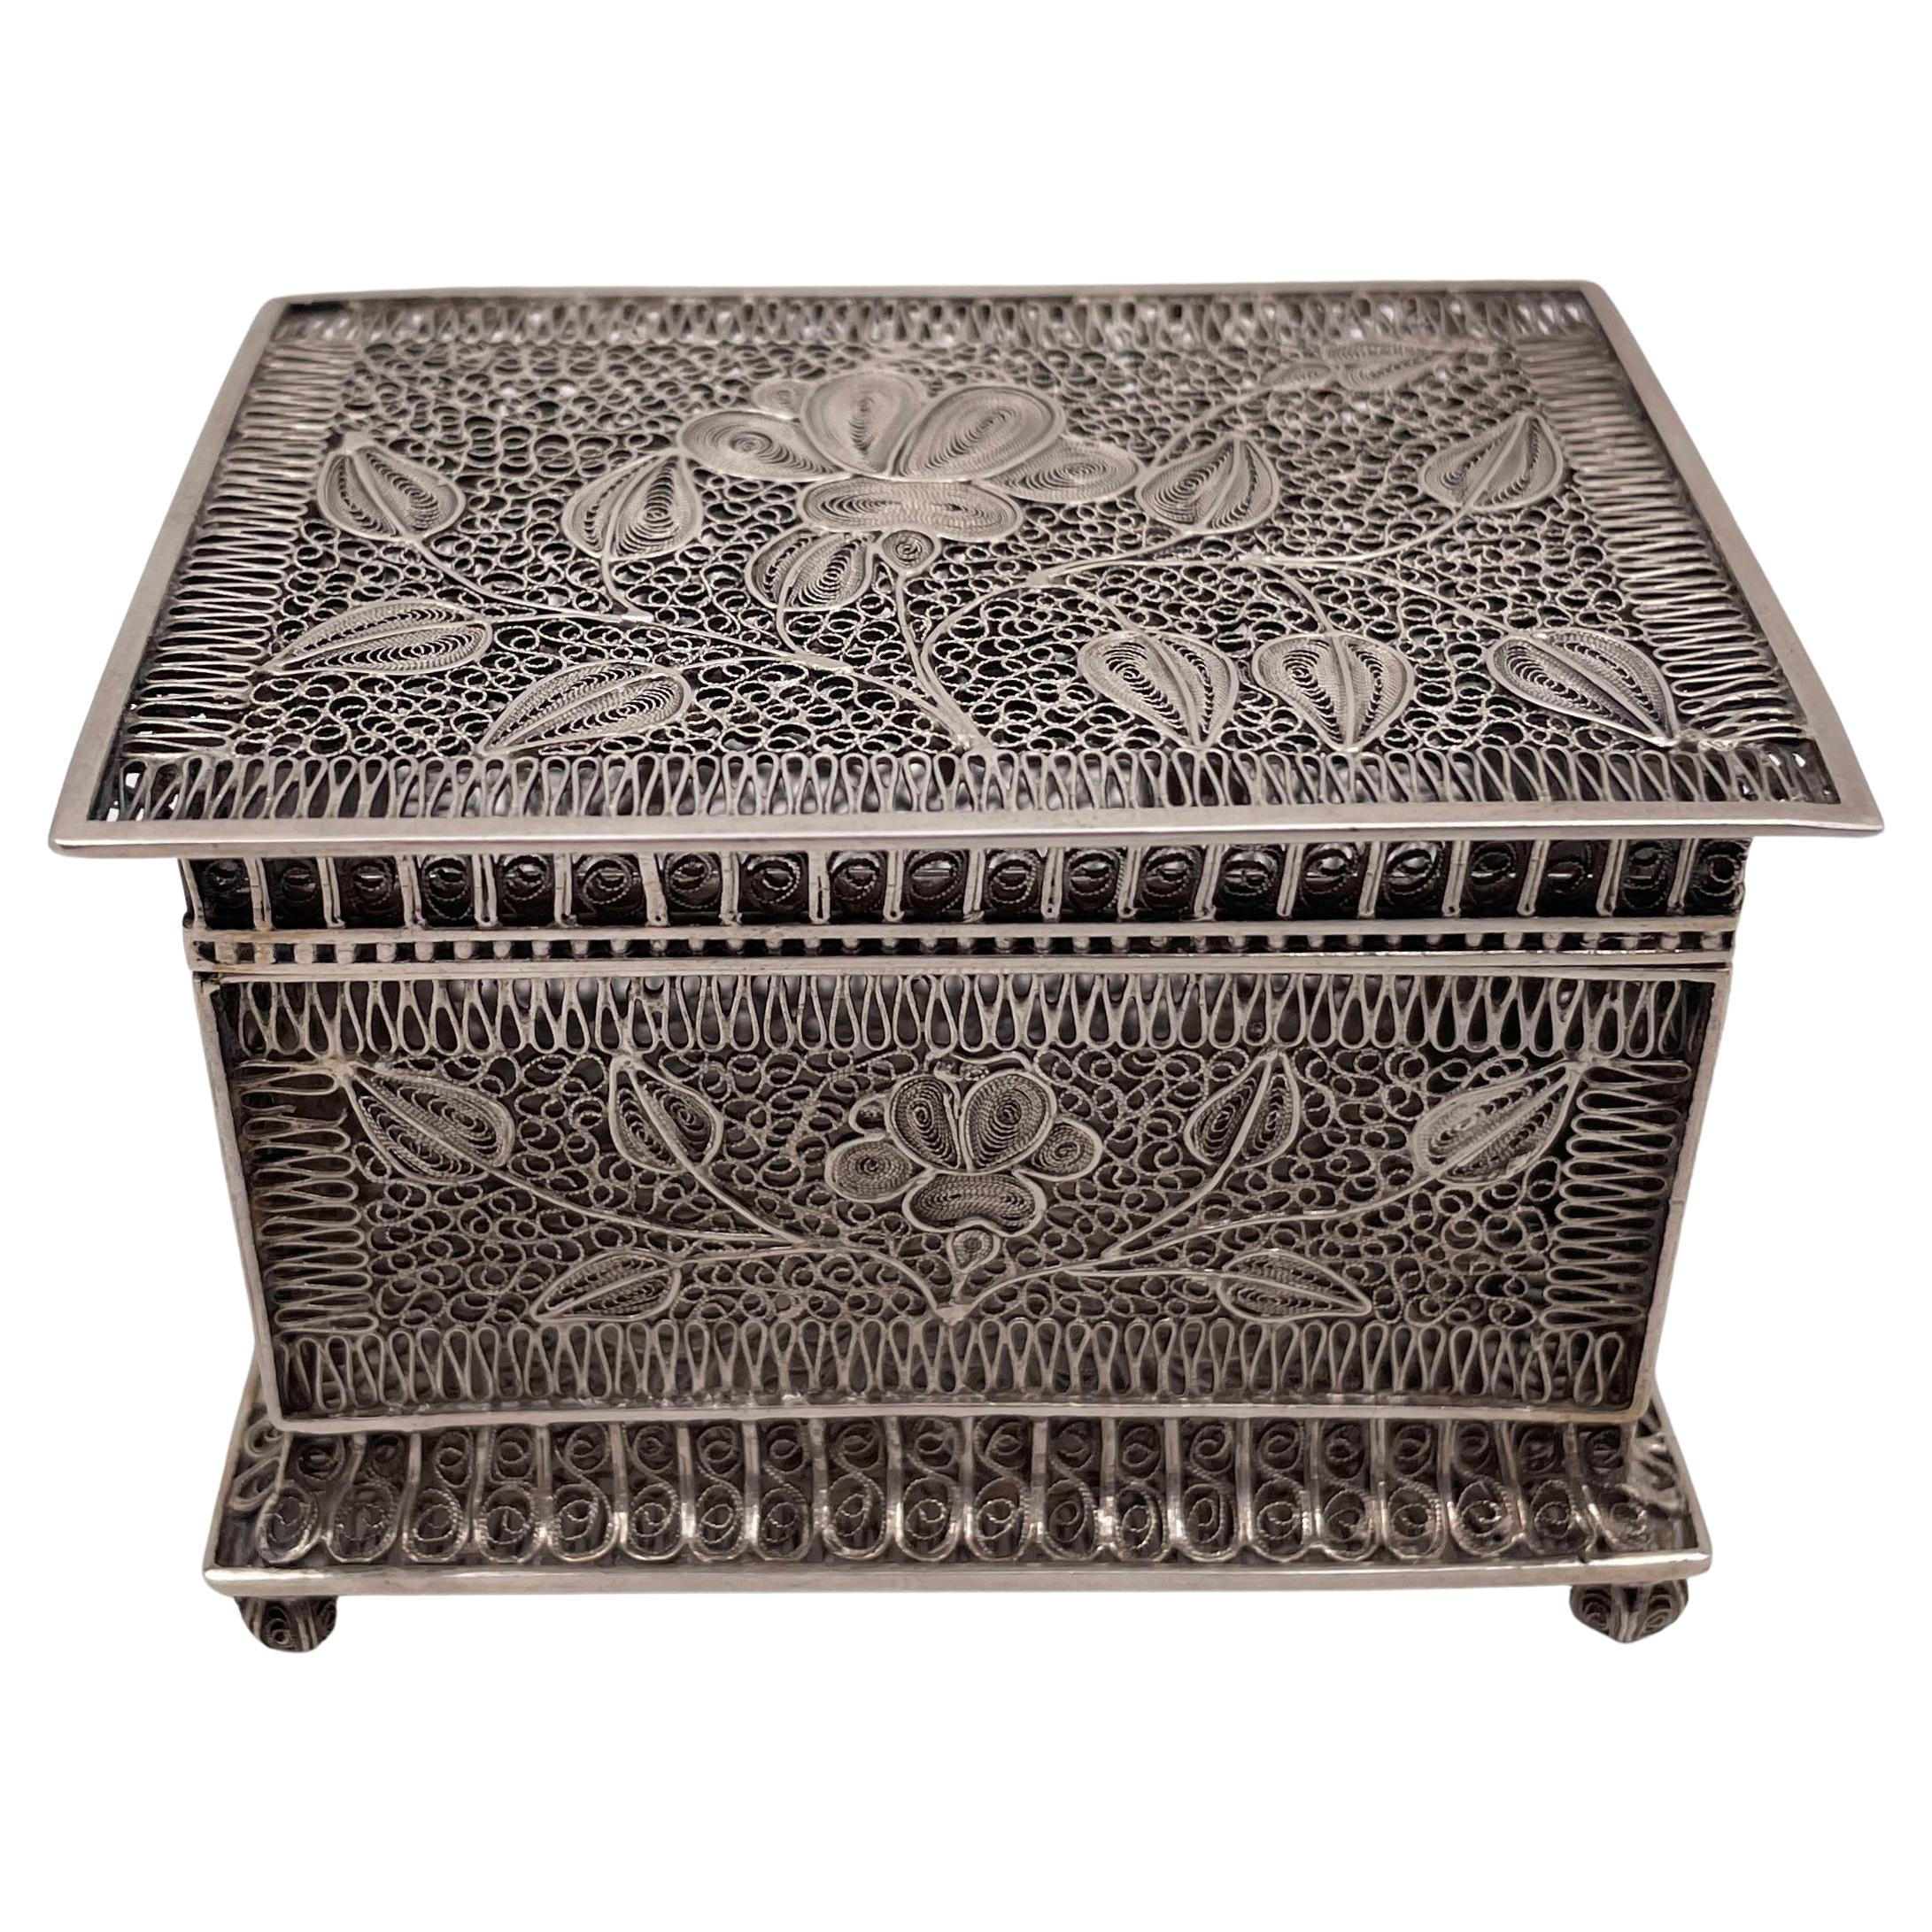 Filigree Early 20th Century Silver Box with Floral Motifs For Sale